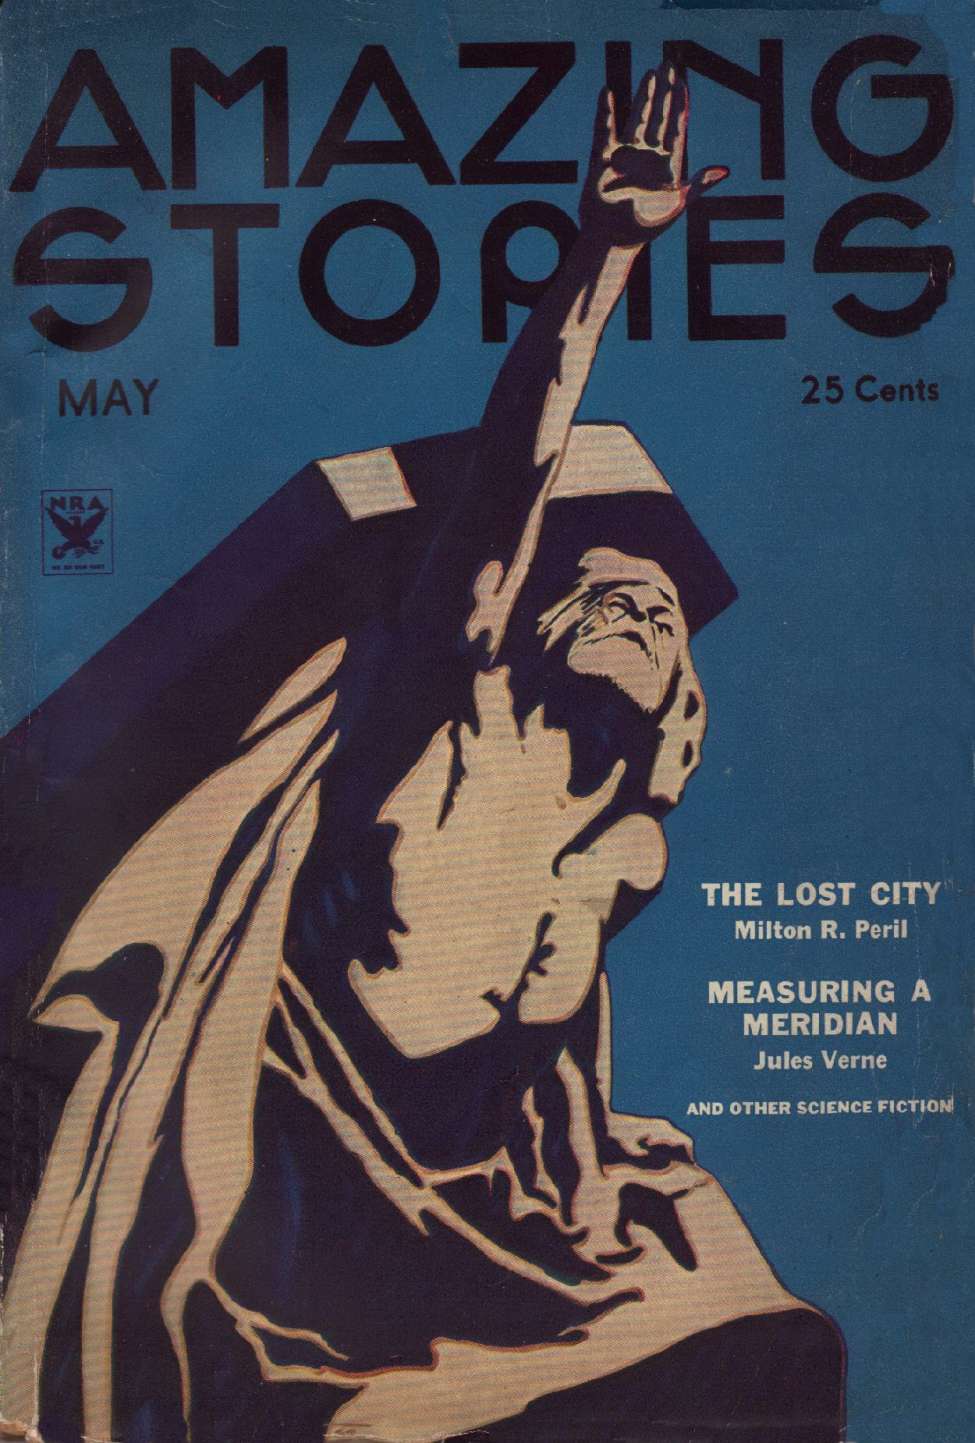 Book Cover For Amazing Stories v9 1 - The Lost City - Milton R. Peril